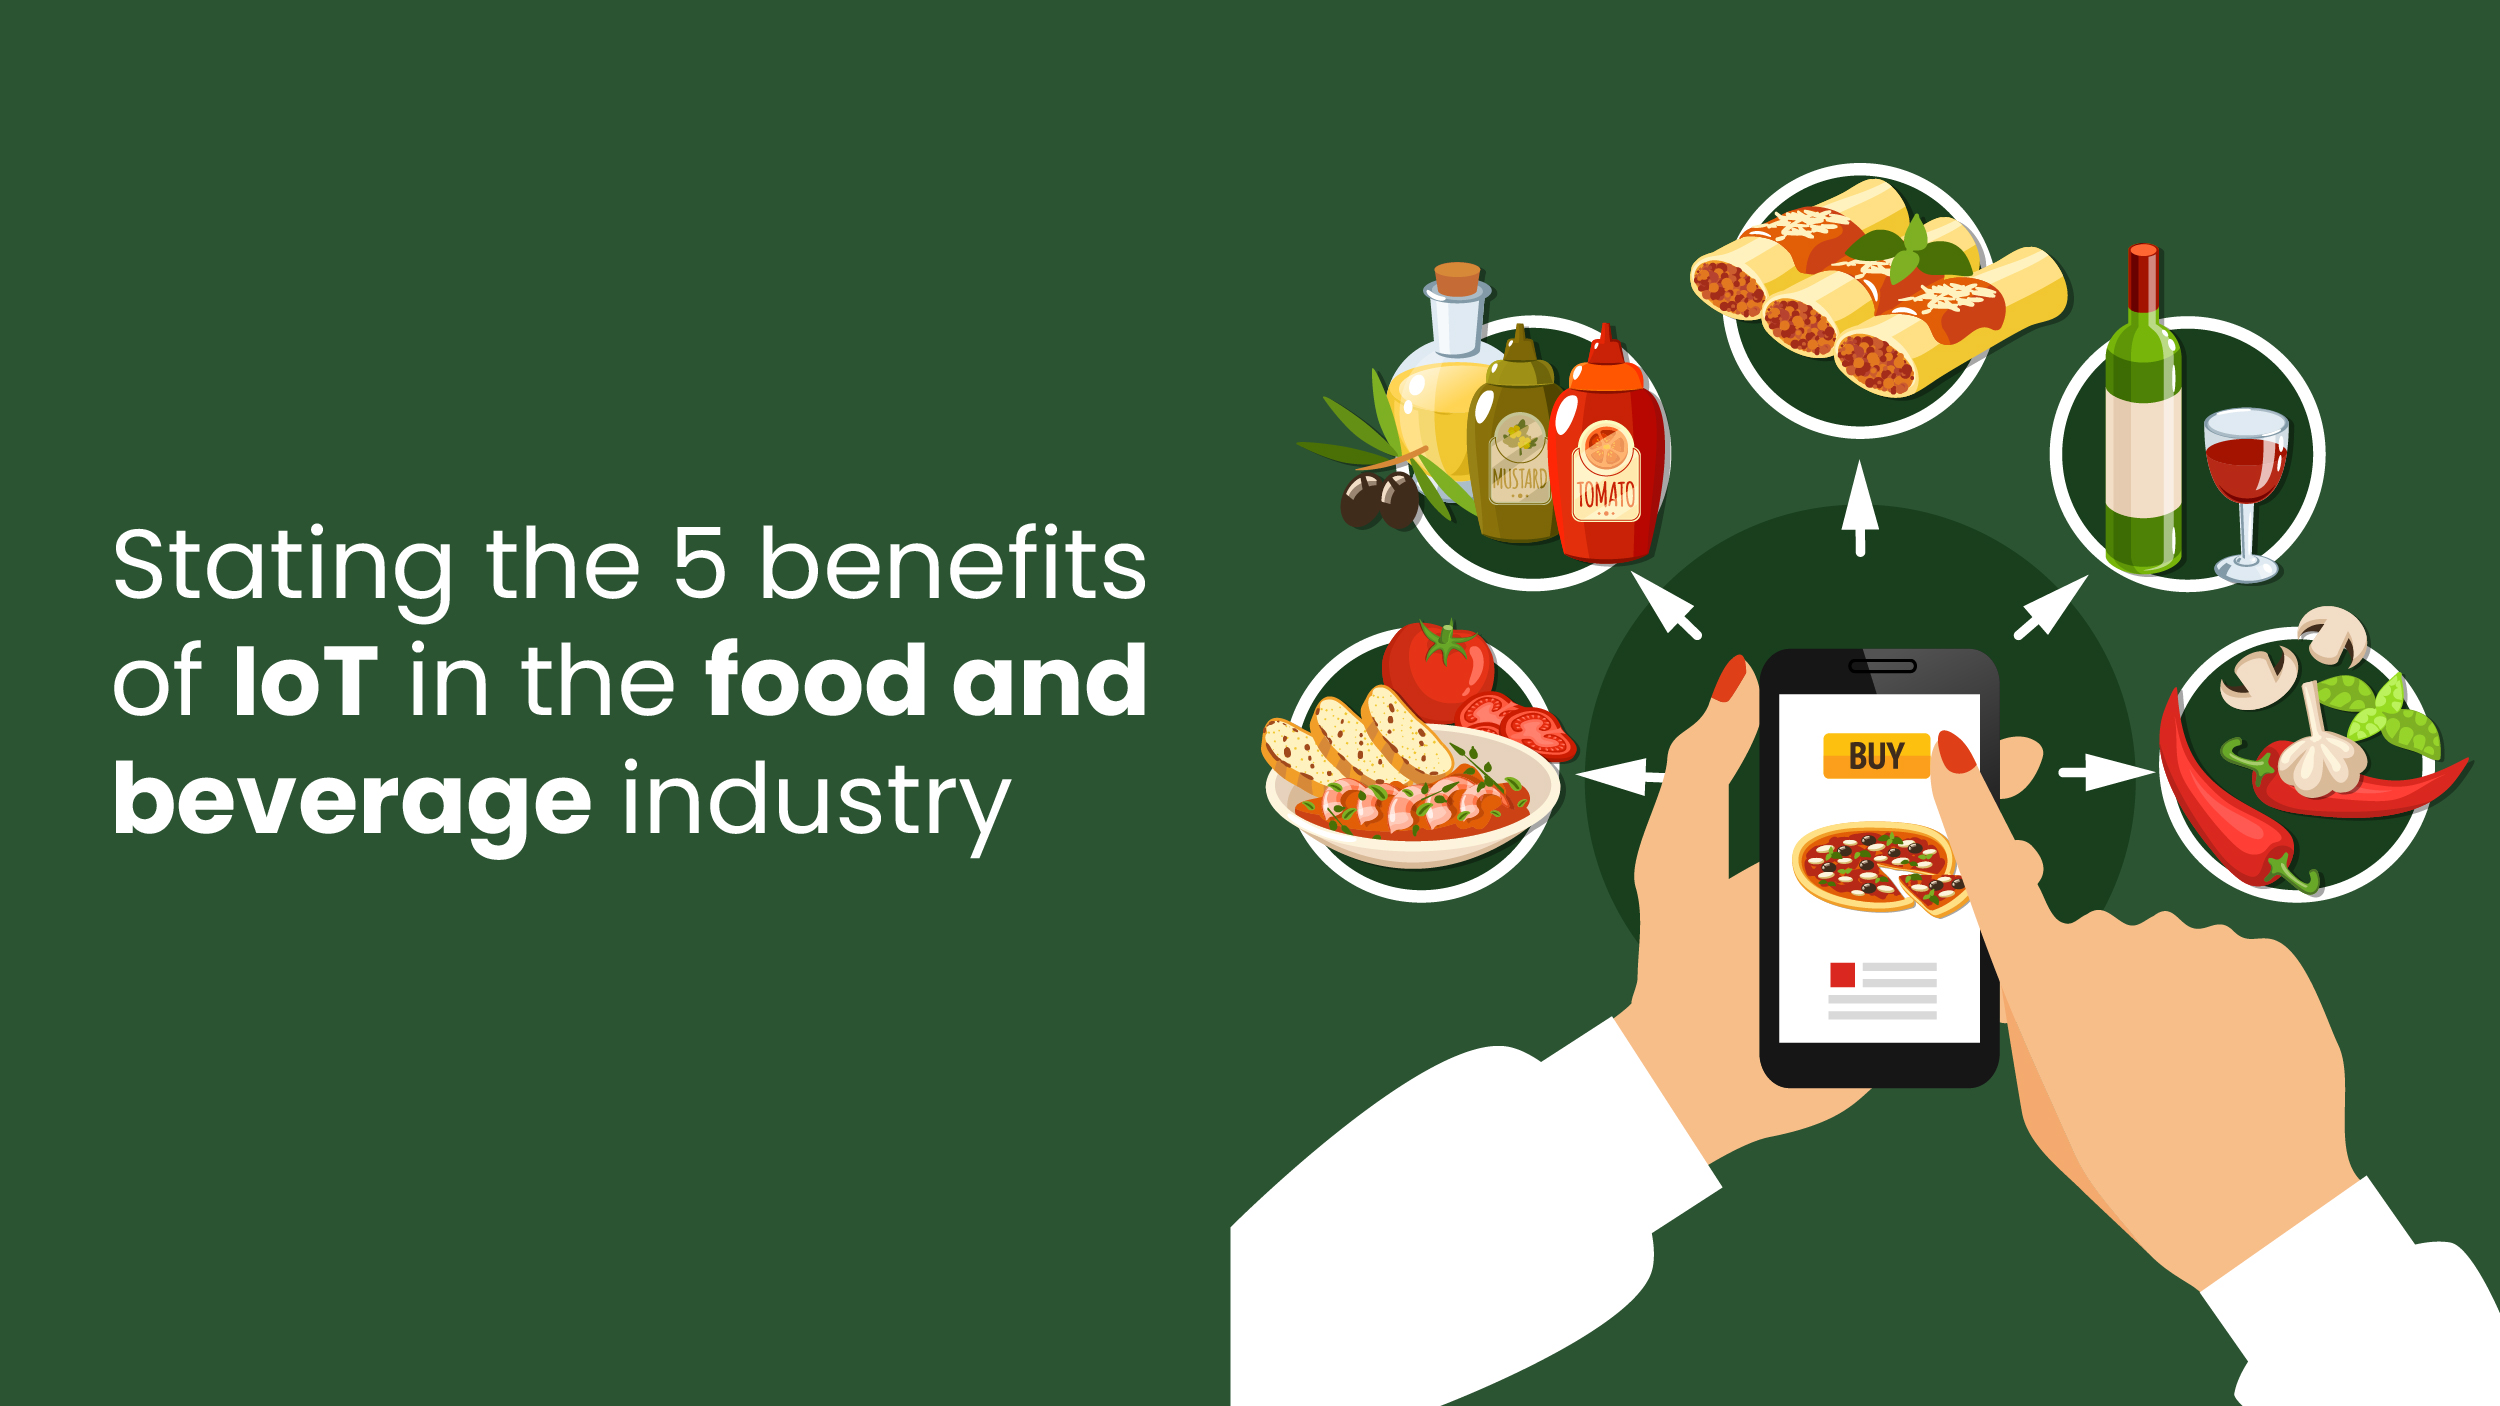 IoT in the food and beverage industry